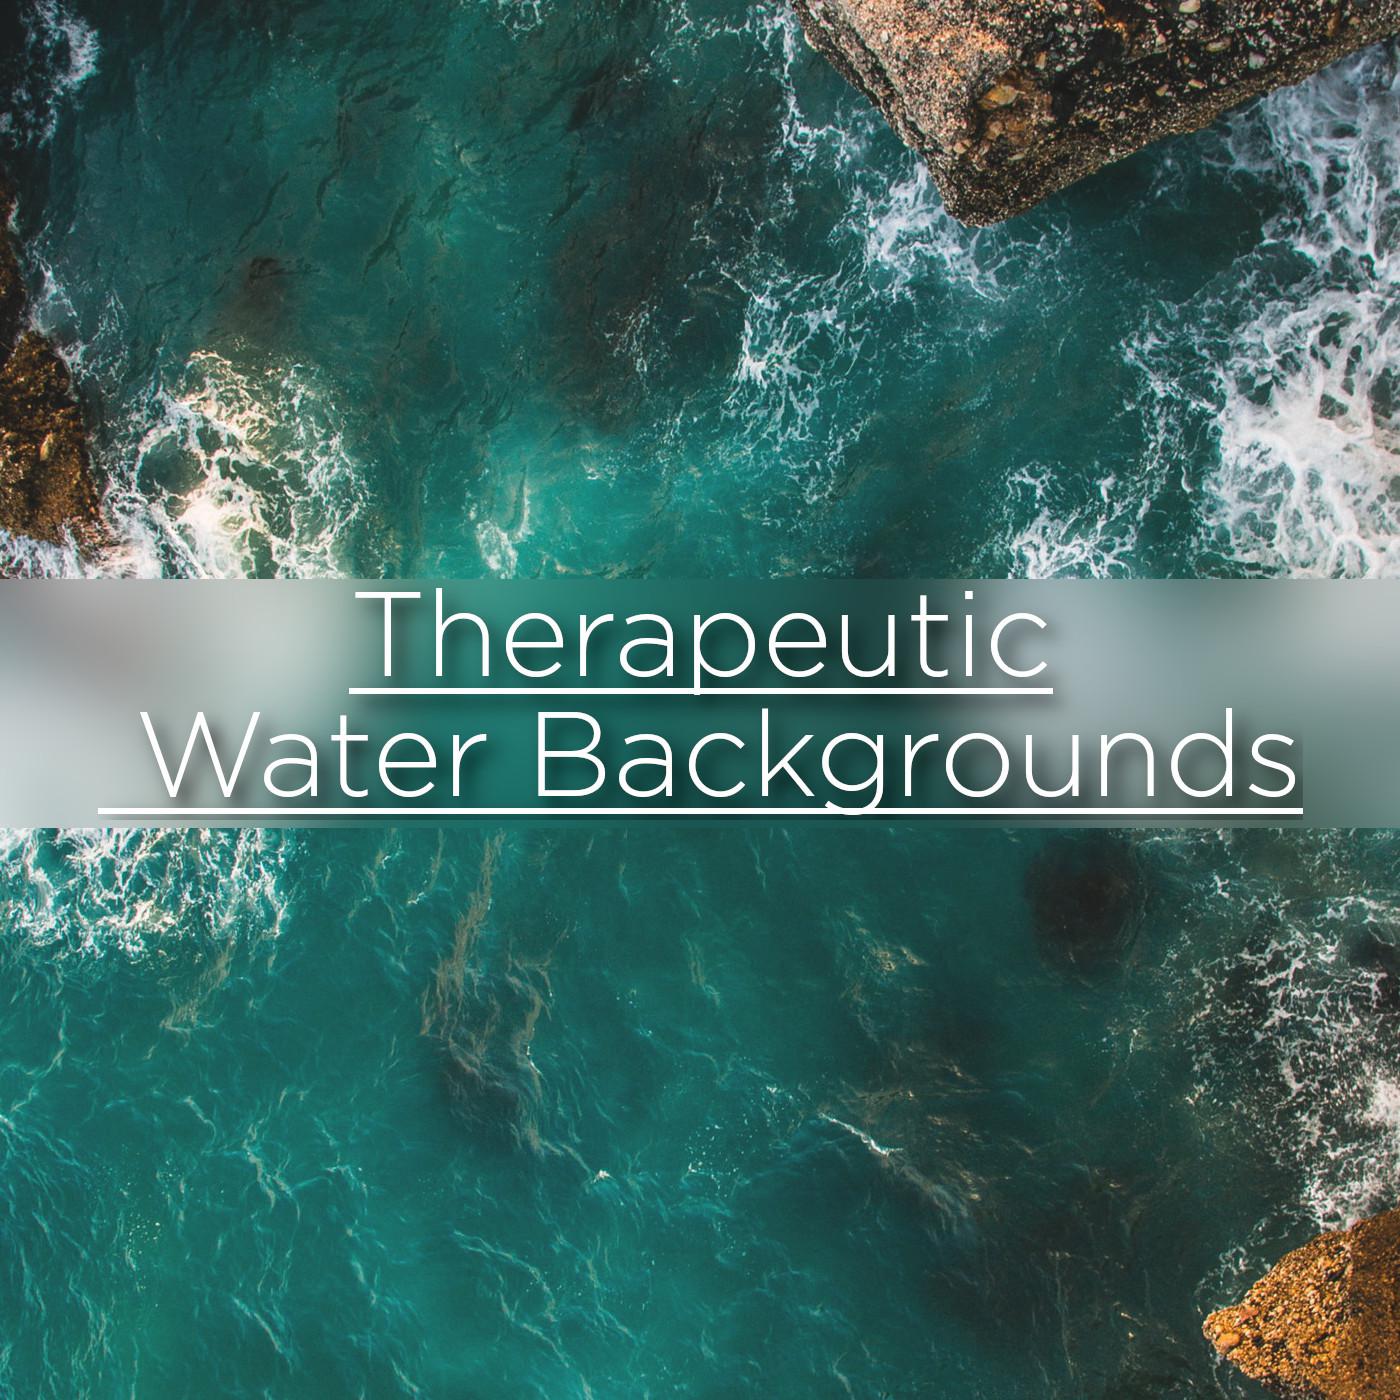 Therapeutic Water Backgrounds